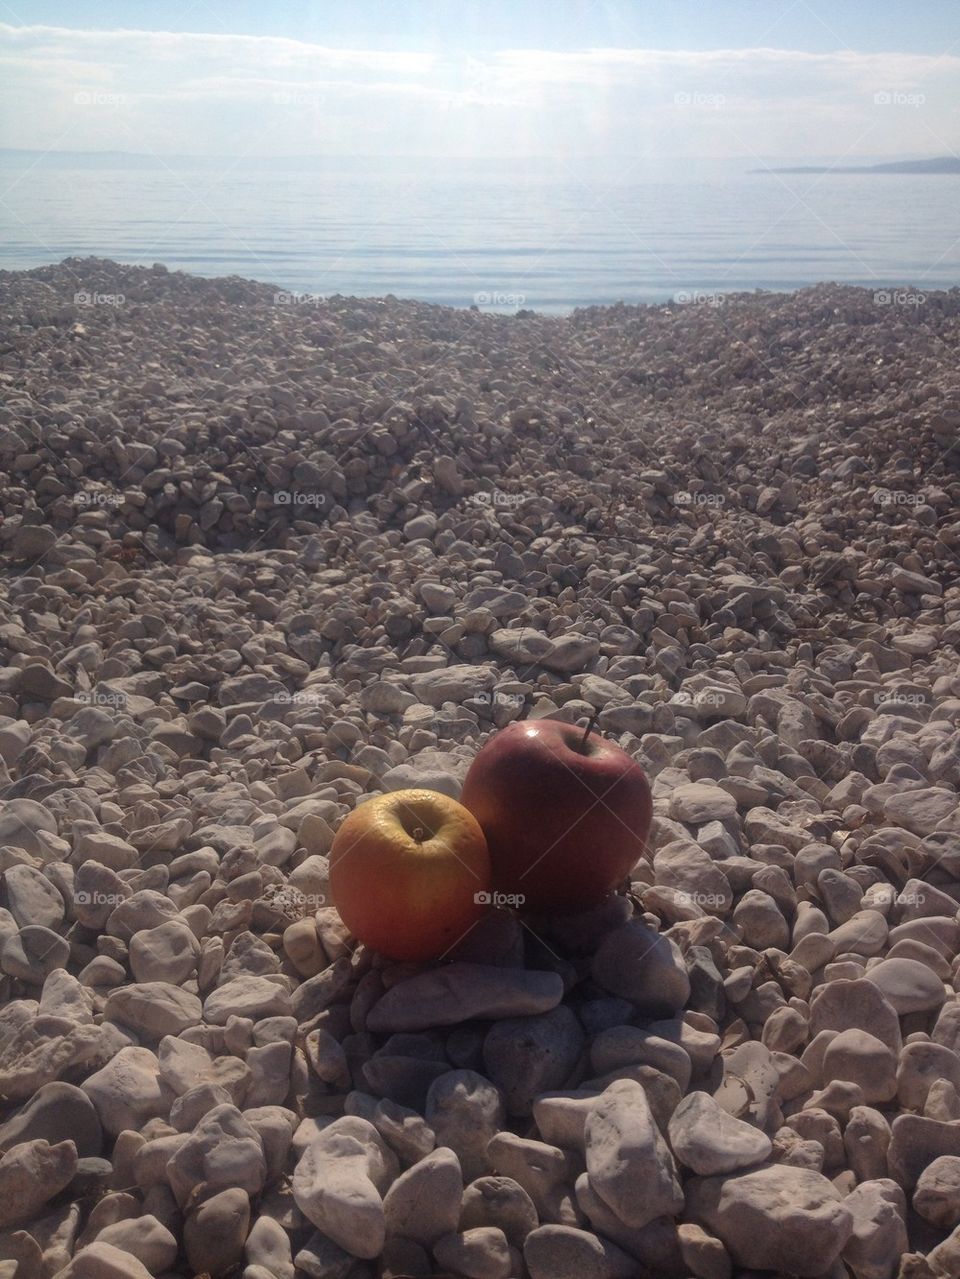 Apples and the beach